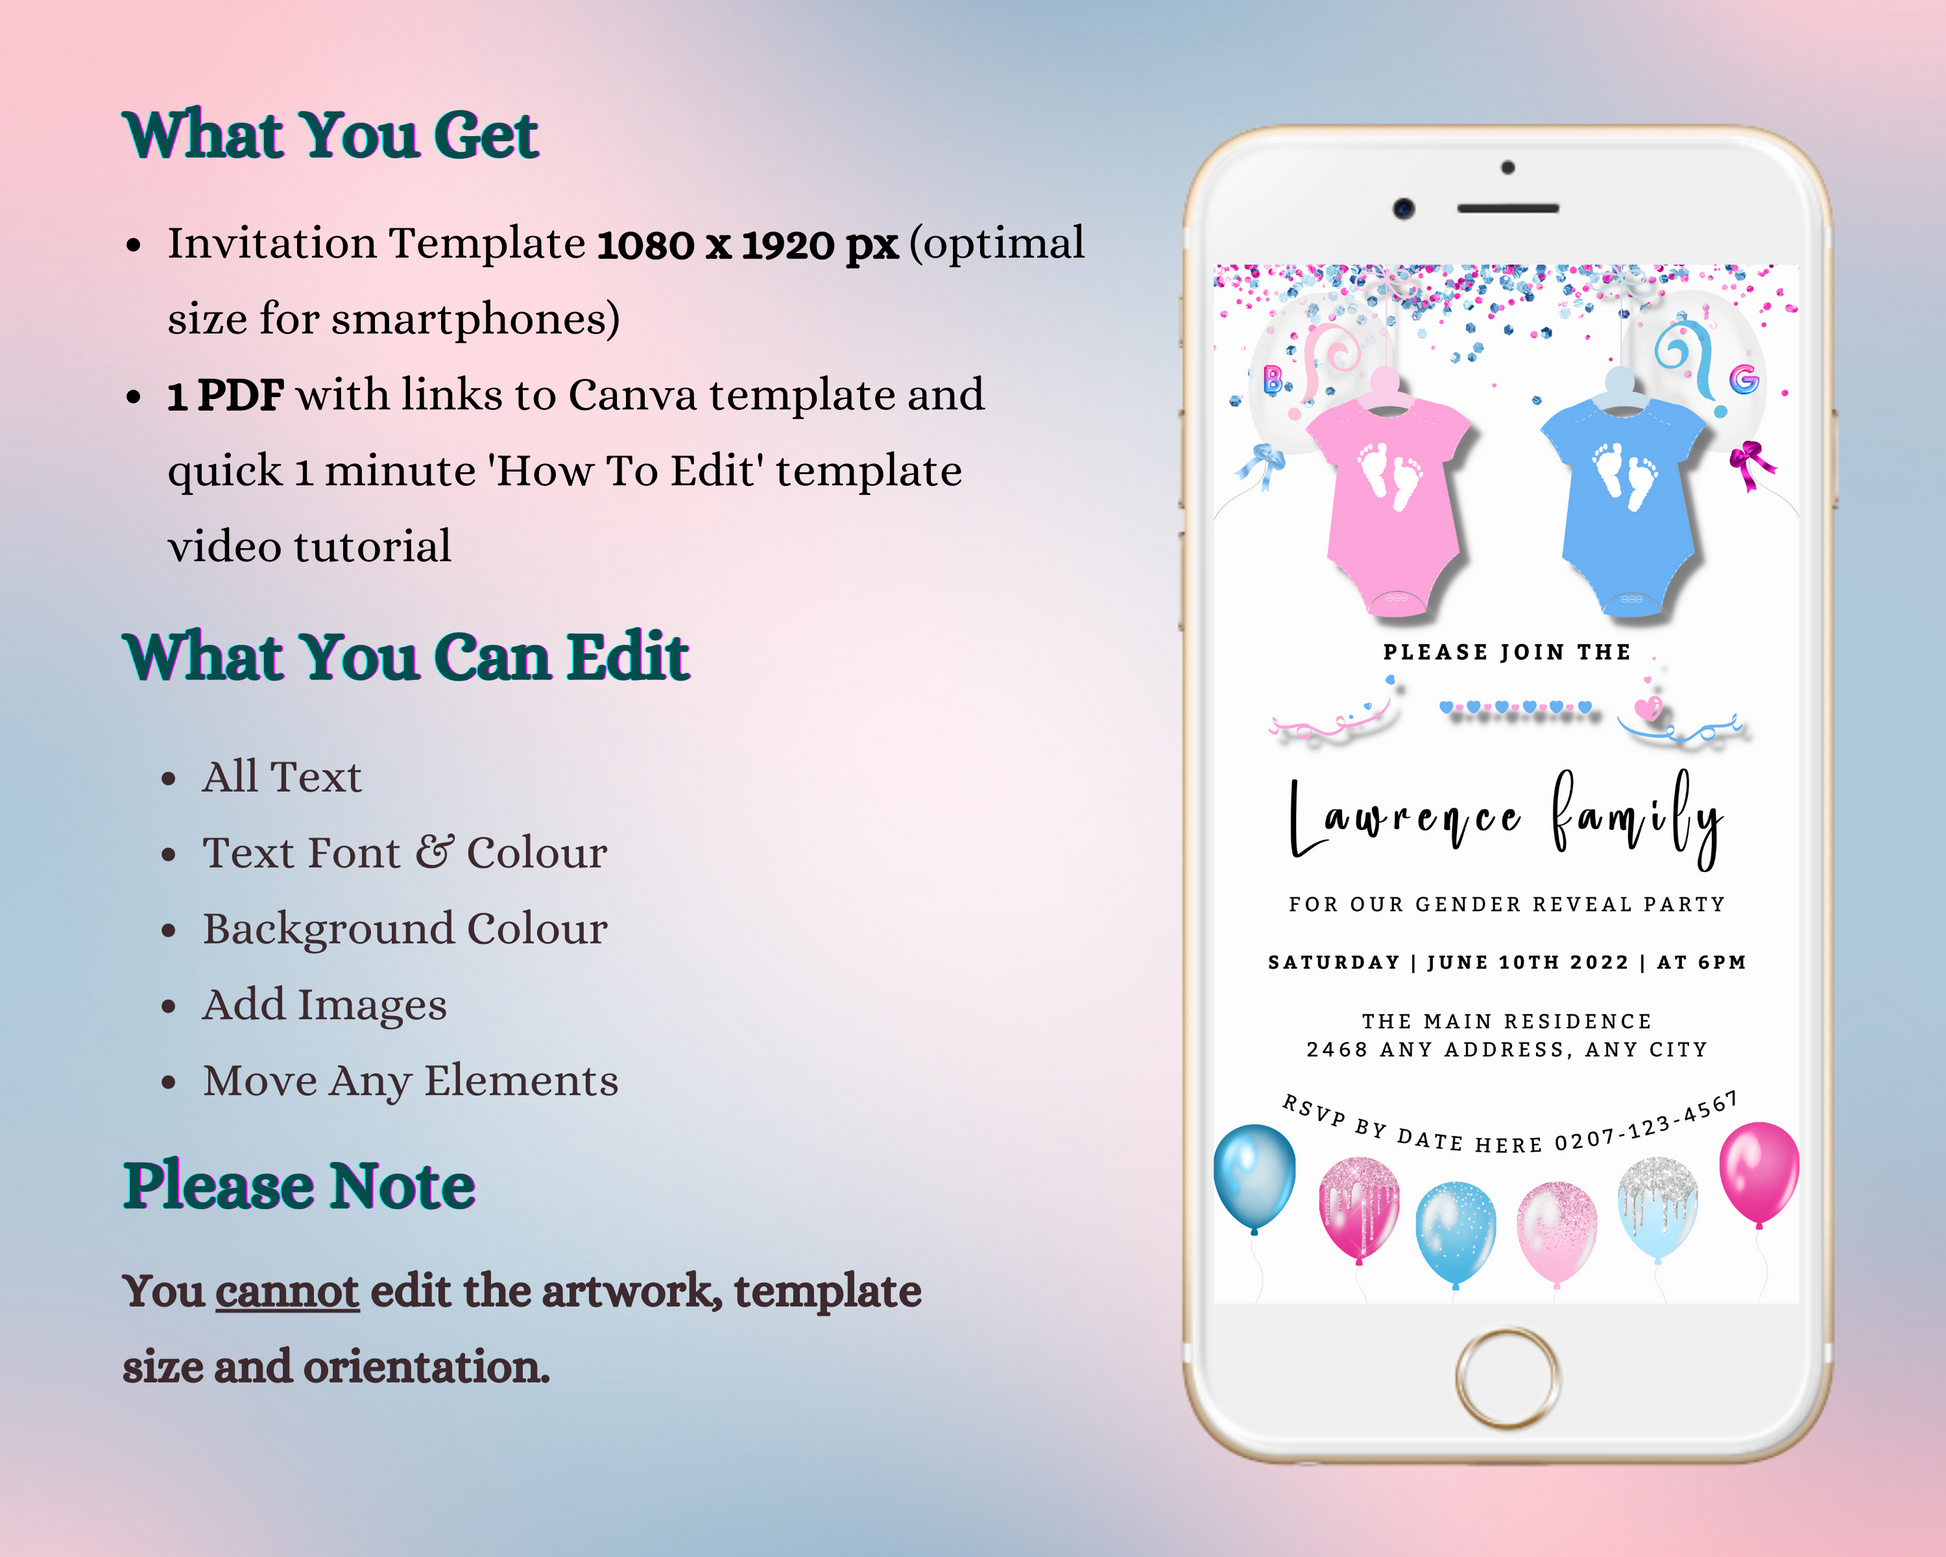 A smartphone displaying a customizable digital baby shower invitation with blue and pink baby bodysuits and confetti, designed for gender reveal events.